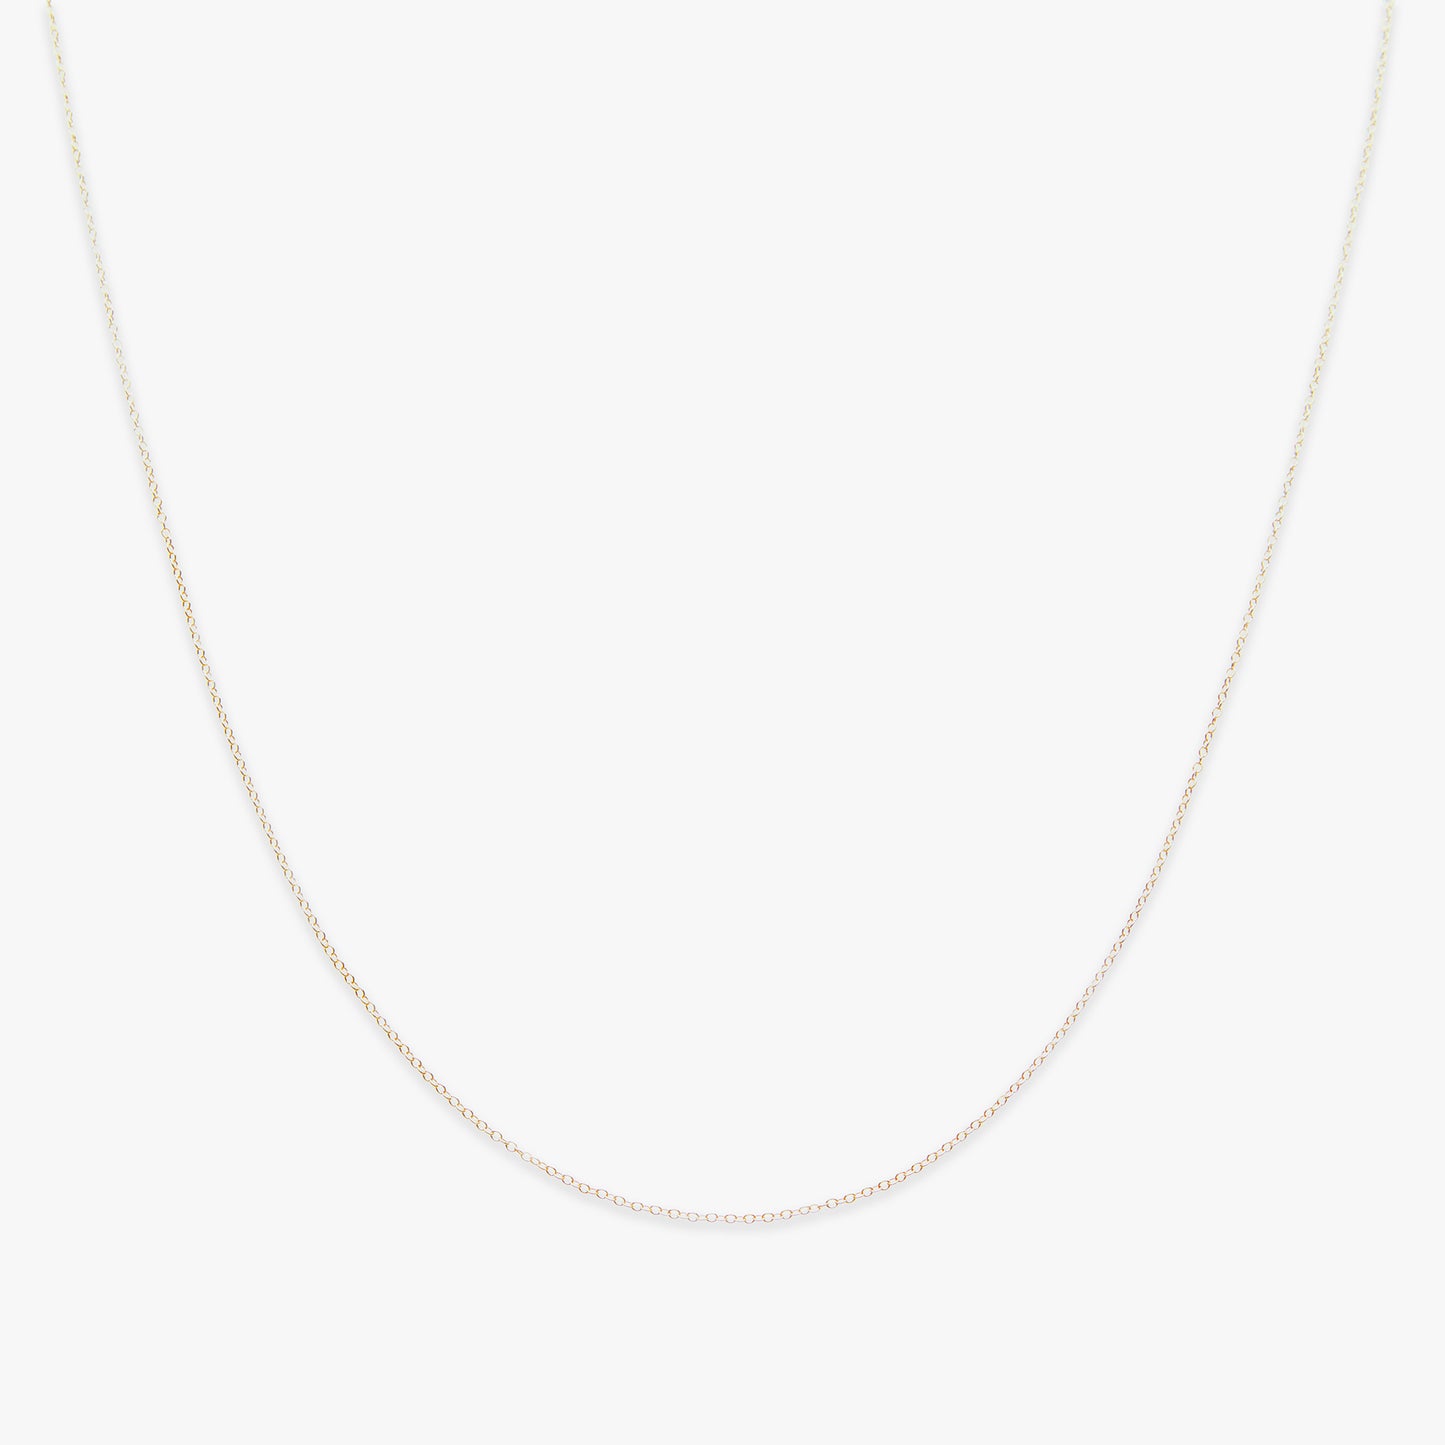 Basic oval chain necklace gold filled